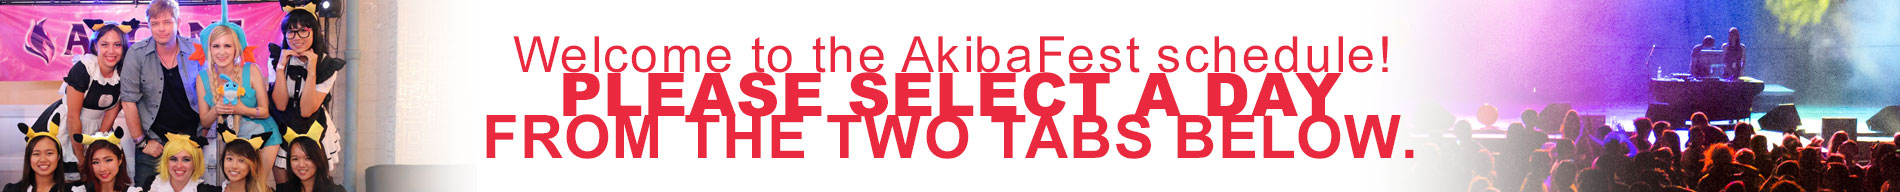 Welcome to the AkibaFest schedule! Please select a day from the two tabs below.